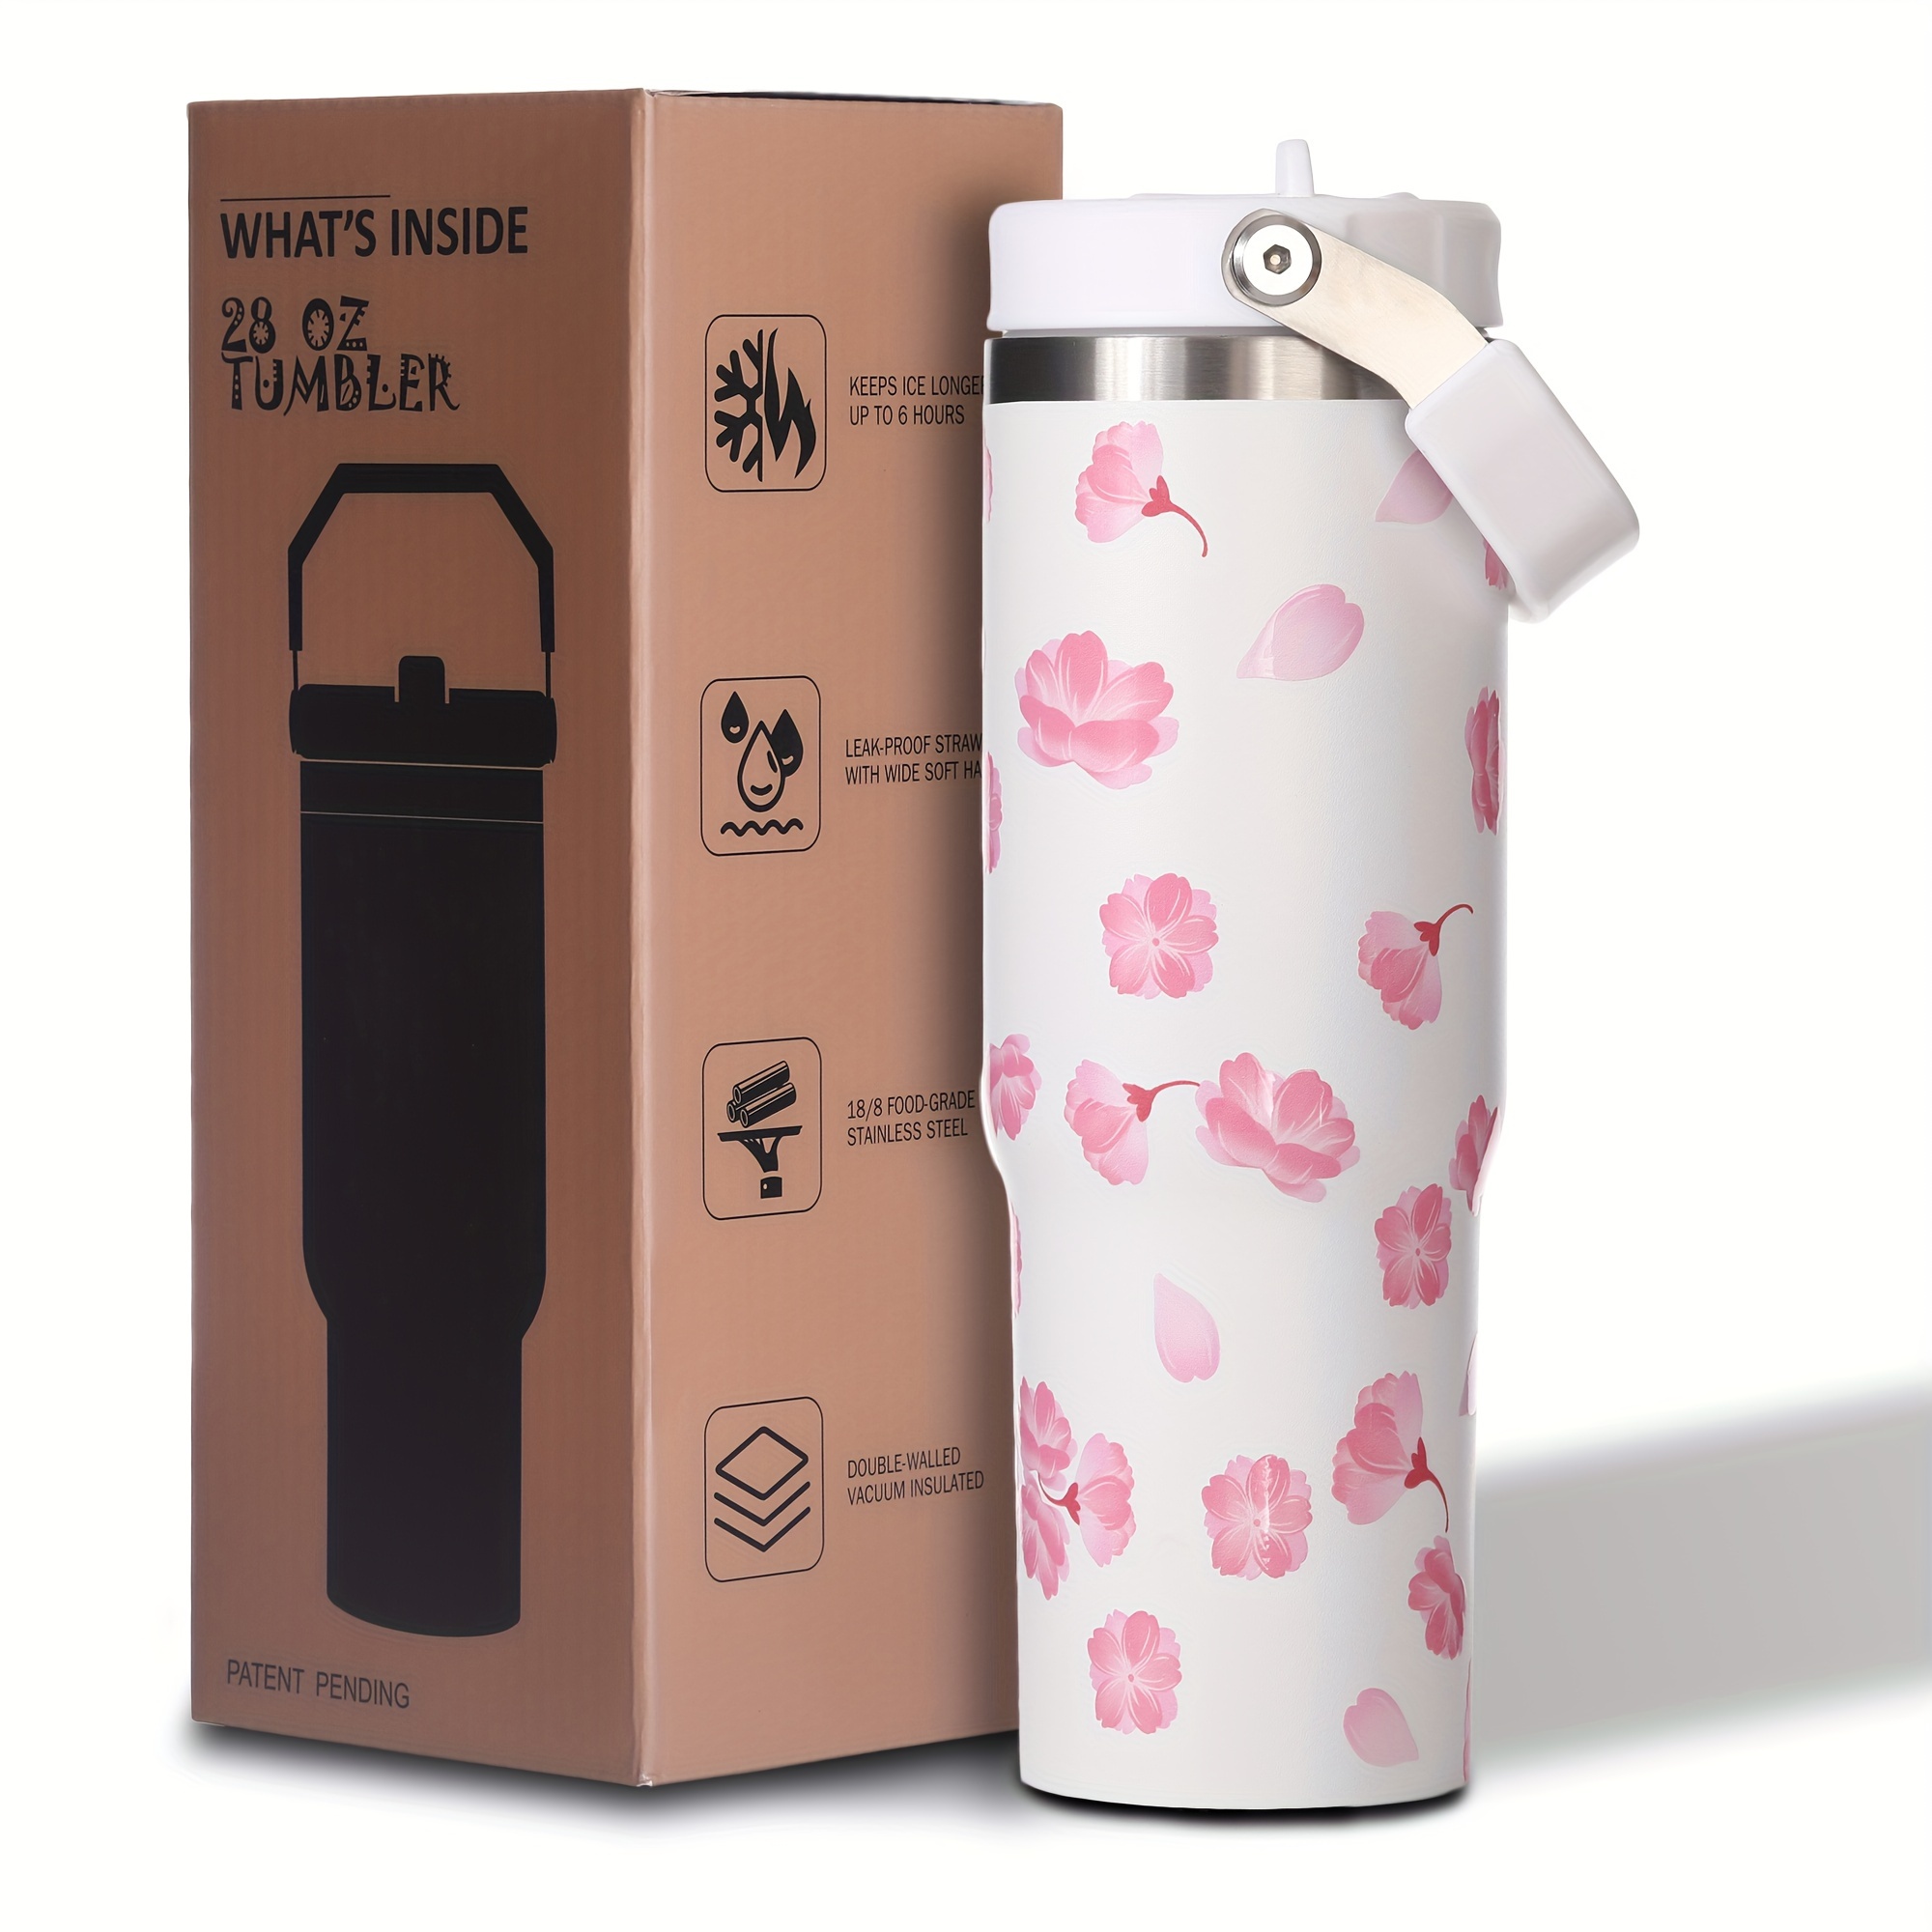 

Weboia Sakura 30 Oz Tumbler With Flip Straw - Insulated Cherry Water Bottle With Handle - Stainless Steel Cup With Lid For Home - Unique Birthday Gift Idea - Hand Wash Only